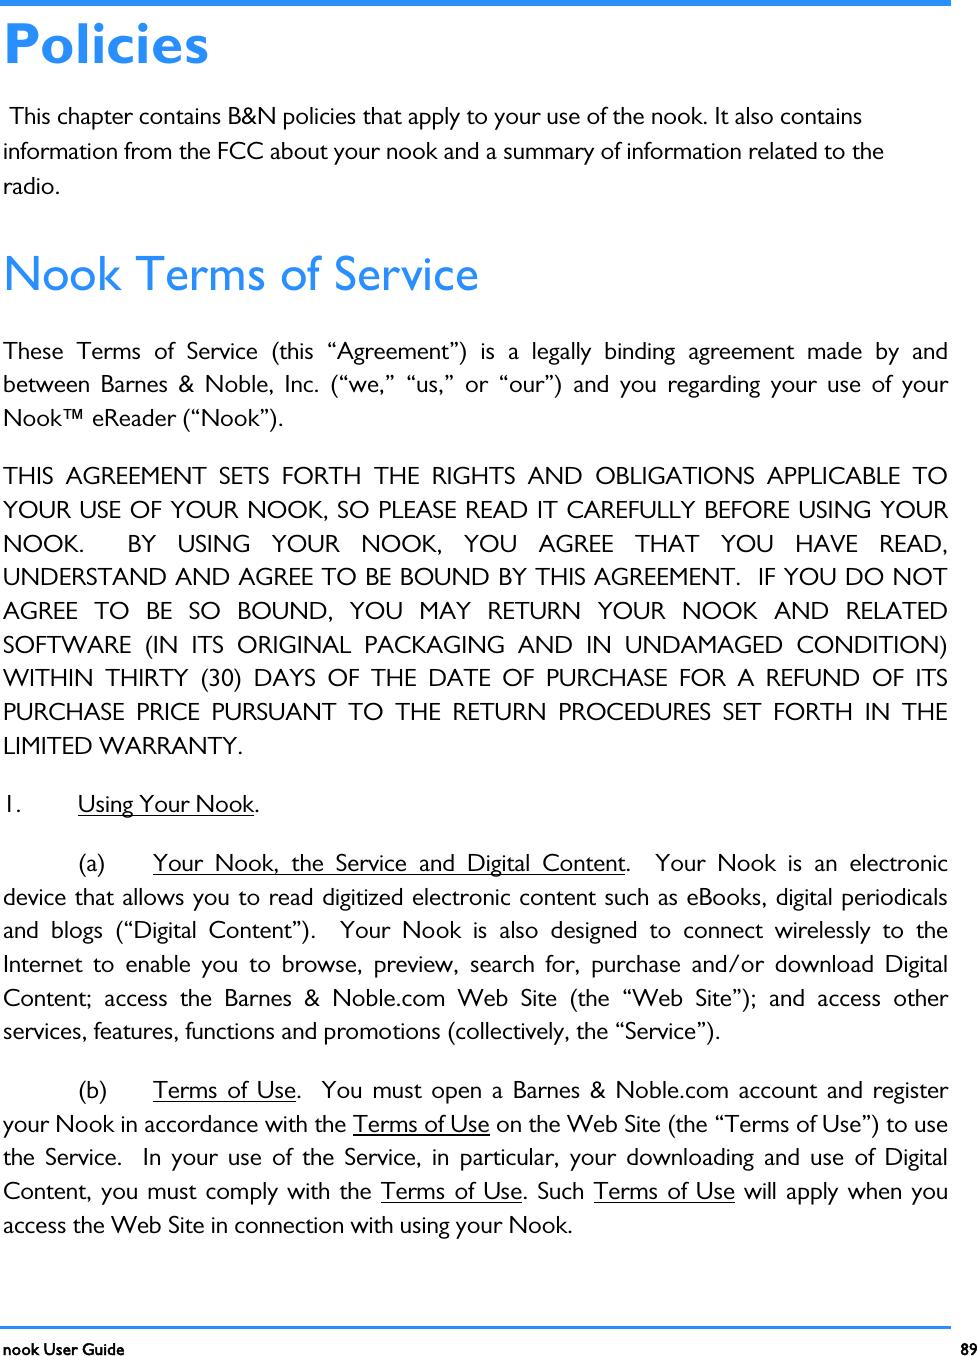  nook User Guide    89        Policies  This chapter contains B&amp;N policies that apply to your use of the nook. It also contains information from the FCC about your nook and a summary of information related to the radio. Nook Terms of Service These Terms of Service (this “Agreement”) is a legally binding agreement made by and between Barnes &amp; Noble, Inc. (“we,” “us,” or “our”) and you regarding your use of your Nook™ eReader (“Nook”).   THIS AGREEMENT SETS FORTH THE RIGHTS AND OBLIGATIONS APPLICABLE TO YOUR USE OF YOUR NOOK, SO PLEASE READ IT CAREFULLY BEFORE USING YOUR NOOK.  BY USING YOUR NOOK, YOU AGREE THAT YOU HAVE READ, UNDERSTAND AND AGREE TO BE BOUND BY THIS AGREEMENT.  IF YOU DO NOT AGREE TO BE SO BOUND, YOU MAY RETURN YOUR NOOK AND RELATED SOFTWARE (IN ITS ORIGINAL PACKAGING AND IN UNDAMAGED CONDITION) WITHIN THIRTY (30) DAYS OF THE DATE OF PURCHASE FOR A REFUND OF ITS PURCHASE PRICE PURSUANT TO THE RETURN PROCEDURES SET FORTH IN THE LIMITED WARRANTY.  1.  Using Your Nook. (a) Your Nook, the Service and Digital Content.  Your Nook is an electronic device that allows you to read digitized electronic content such as eBooks, digital periodicals and blogs (“Digital Content”).  Your Nook is also designed to connect wirelessly to the Internet to enable you to browse, preview, search for, purchase and/or download Digital Content; access the Barnes &amp; Noble.com Web Site (the “Web Site”); and access other services, features, functions and promotions (collectively, the “Service”).   (b) Terms of Use.  You must open a Barnes &amp; Noble.com account and register your Nook in accordance with the Terms of Use on the Web Site (the “Terms of Use”) to use the Service.  In your use of the Service, in particular, your downloading and use of Digital Content, you must comply with the Terms of Use. Such Terms of Use will apply when you access the Web Site in connection with using your Nook.   